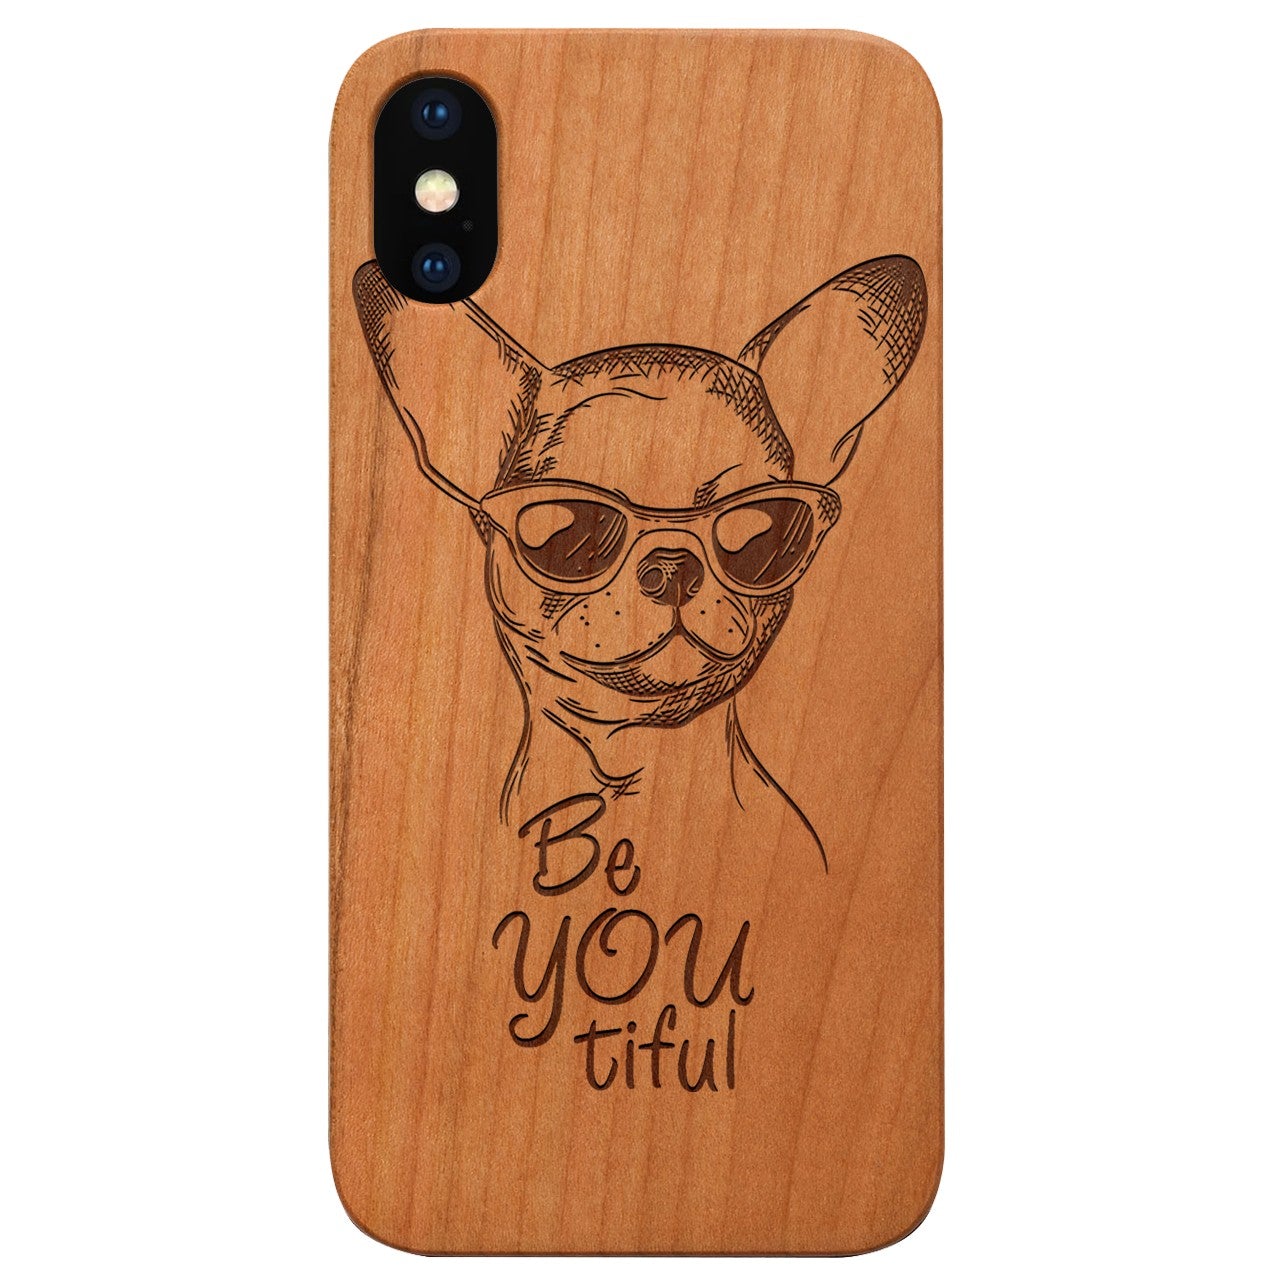  Chihuahua - Engraved - Wooden Phone Case - IPhone 13 Models